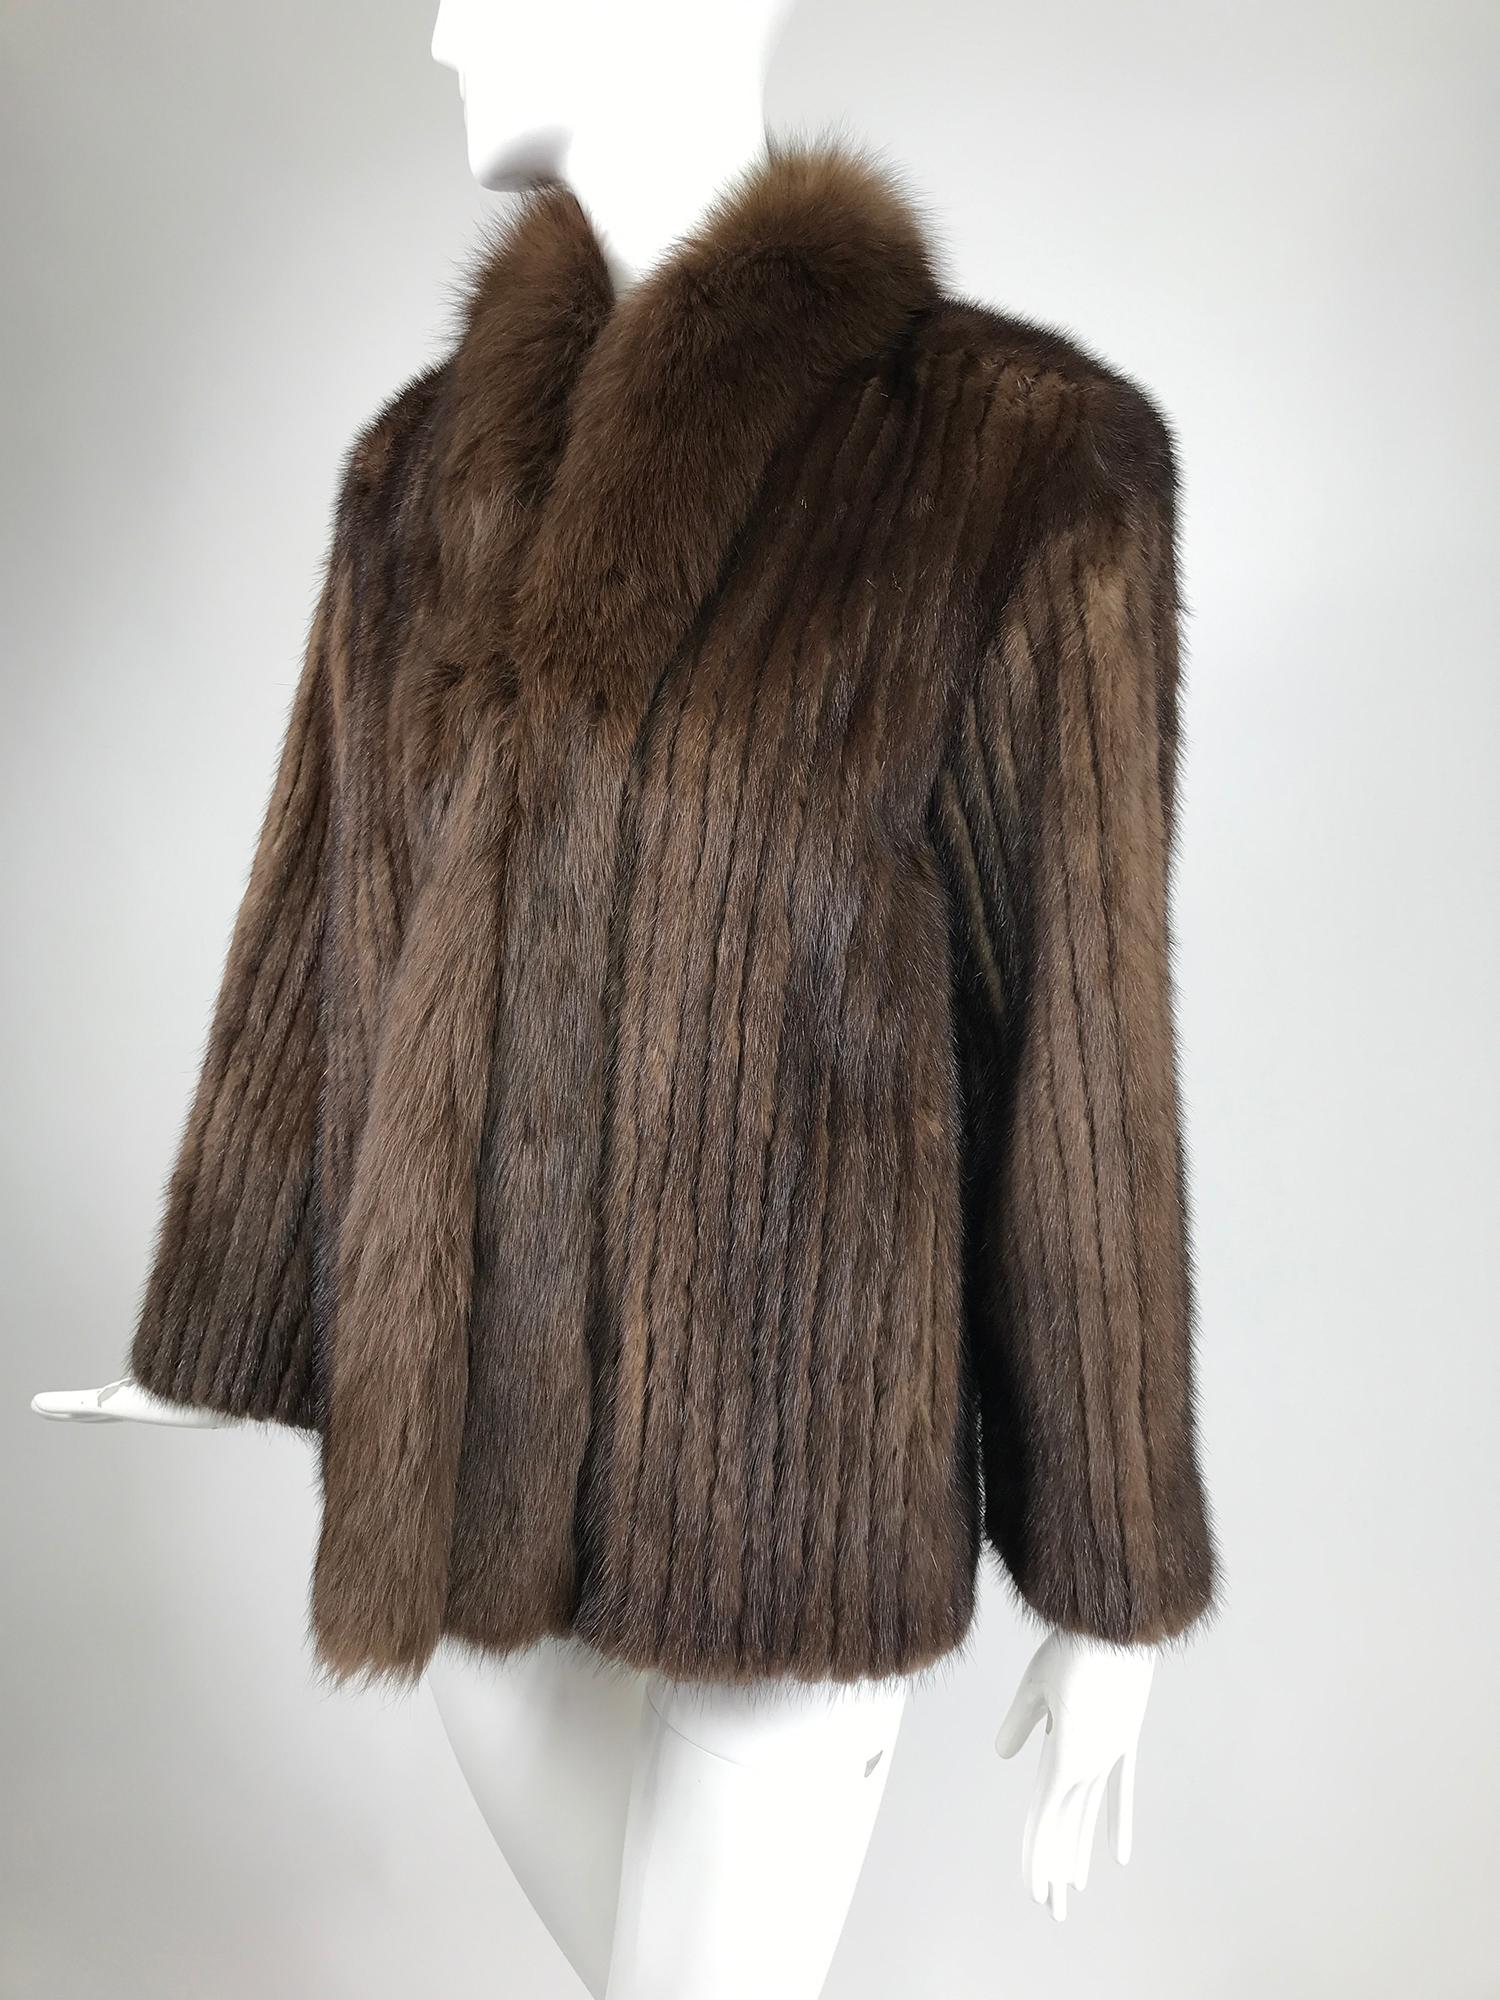 SAGA chestnut mink jacket with fox fur collar and front facings. Made in Denmark. This beautiful jacket is hip length with on seam front pockets. The fur is done in narrow vertical strips, reminiscent of wide wale corduroy. Closes at the front with